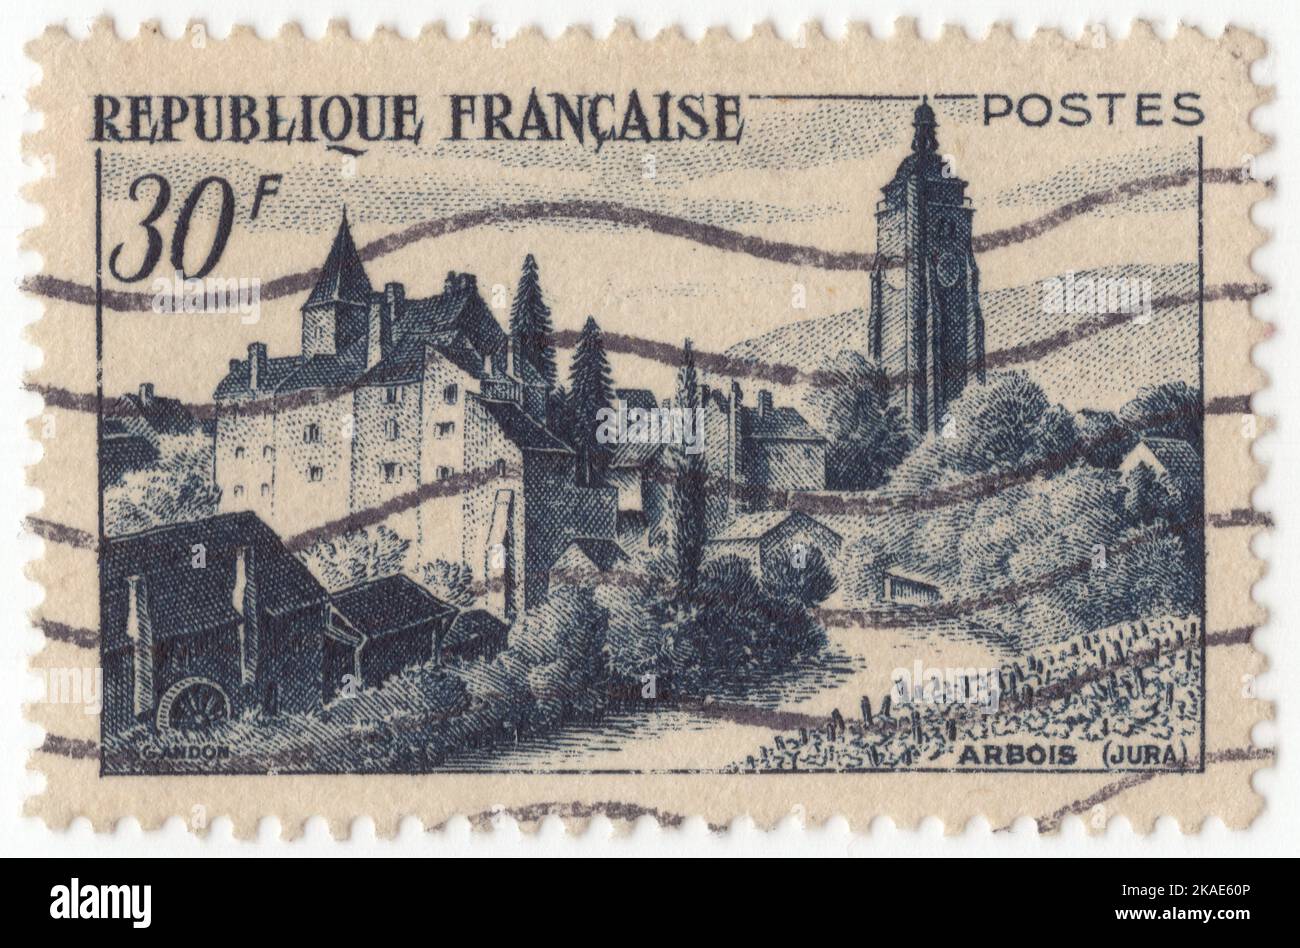 FRANCE - 1963 March 2: An 50 francs black brown postage stamp depicting Abbaye aux Hommes, Caen. The Abbey of Saint-Étienne, also known as Abbaye aux Hommes ('Men's Abbey') by contrast with the Abbaye aux Dames ('Ladies' Abbey'), is a former Benedictine monastery in the French city of Caen, Normandy, dedicated to Saint Stephen. It was founded in 1063[1] by William the Conqueror and is one of the most important Romanesque buildings in Normandy Stock Photo